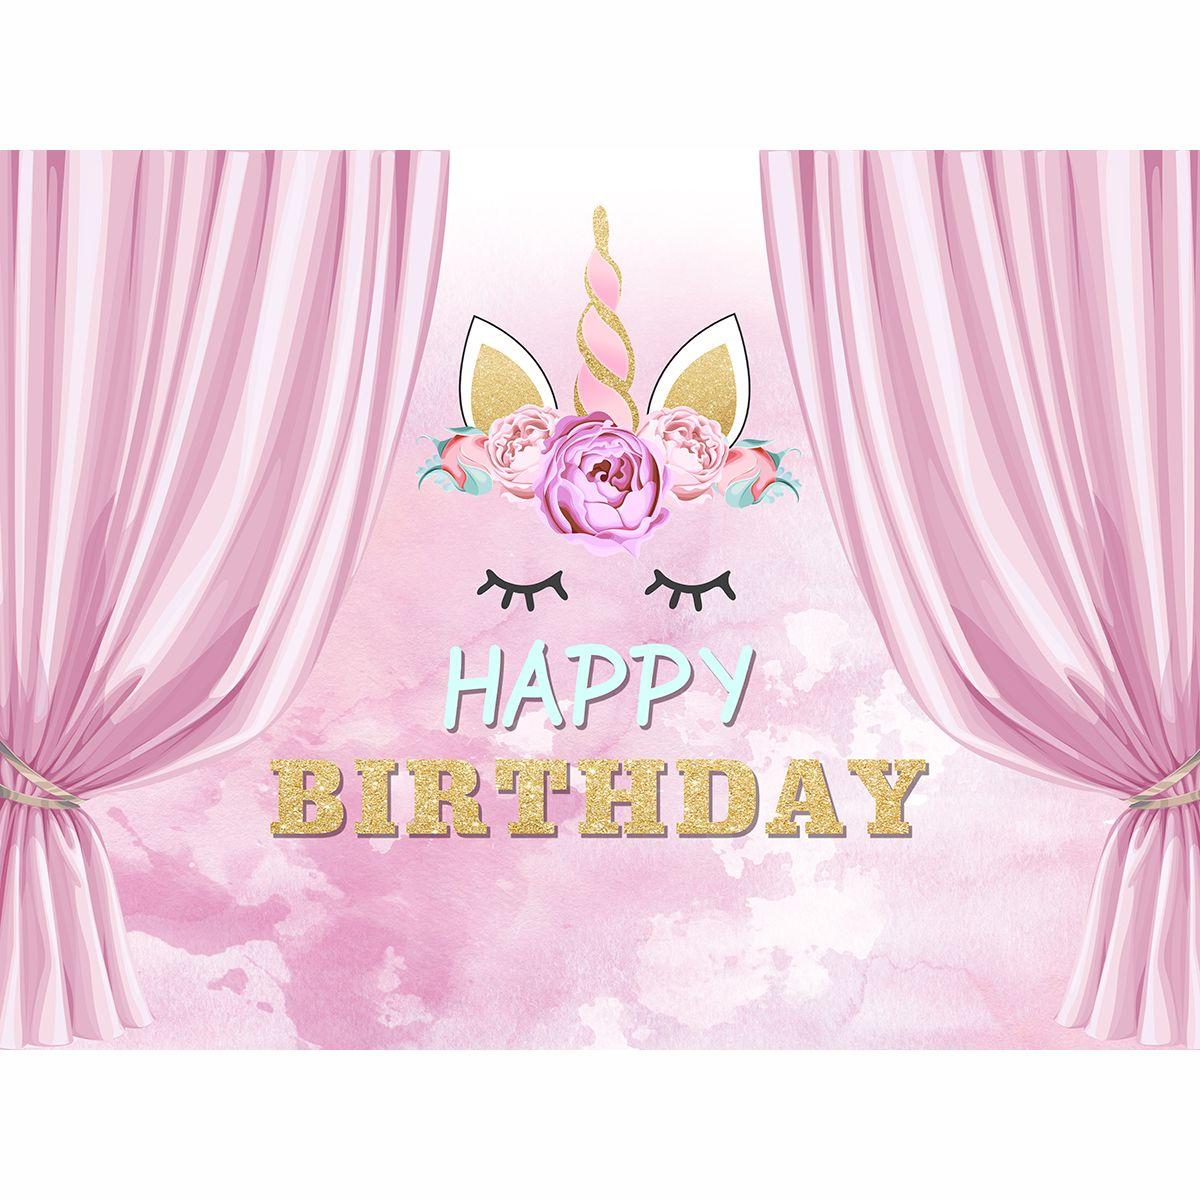 Allenjoy photography backdrop Pink Curtains Cute unicorn happy